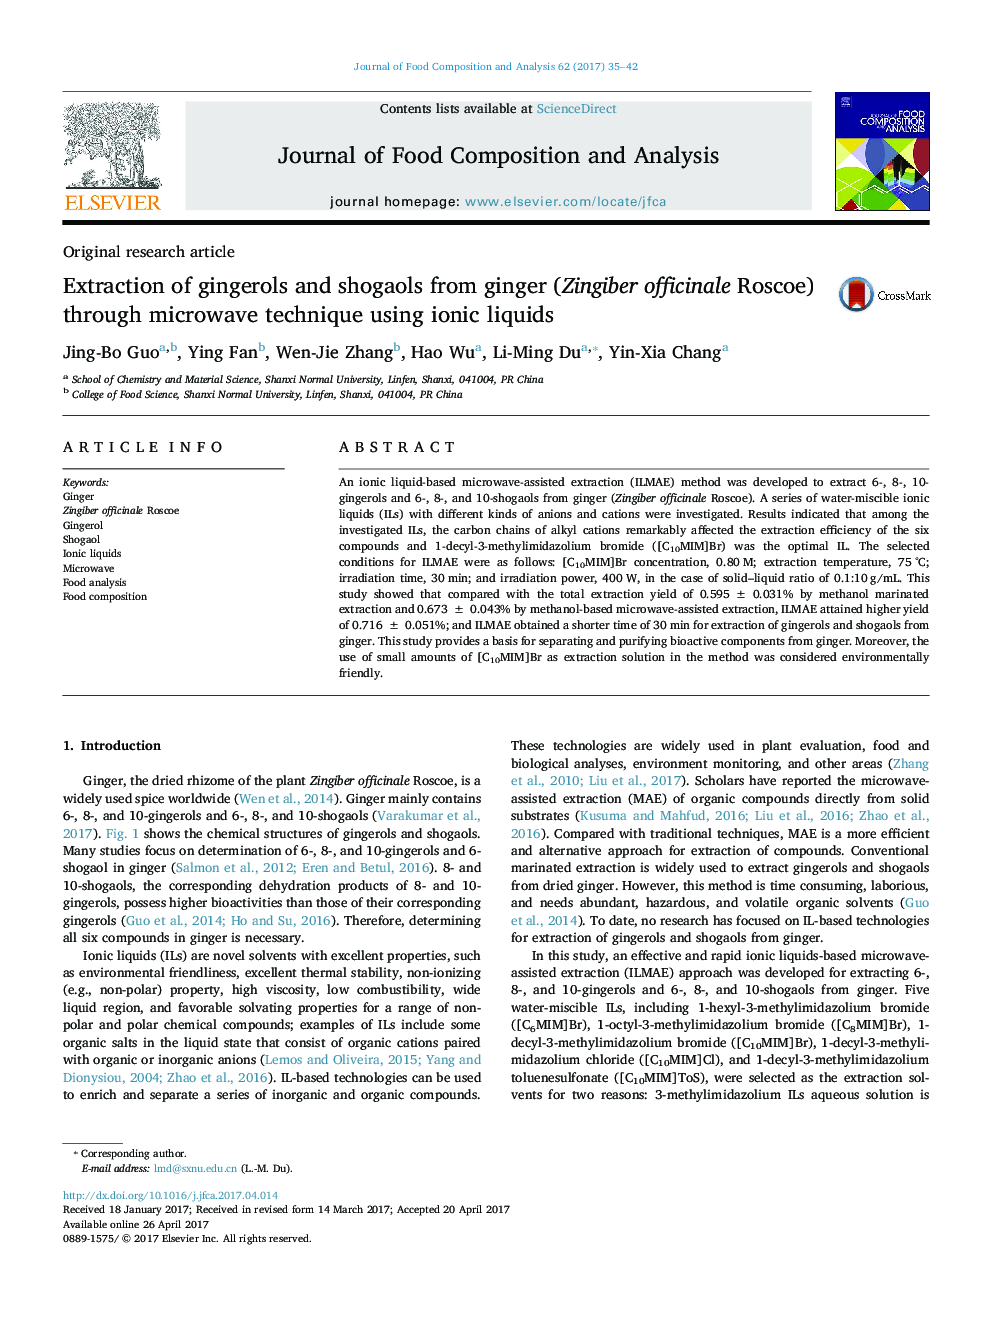 Original research articleExtraction of gingerols and shogaols from ginger (Zingiber officinale Roscoe) through microwave technique using ionic liquids